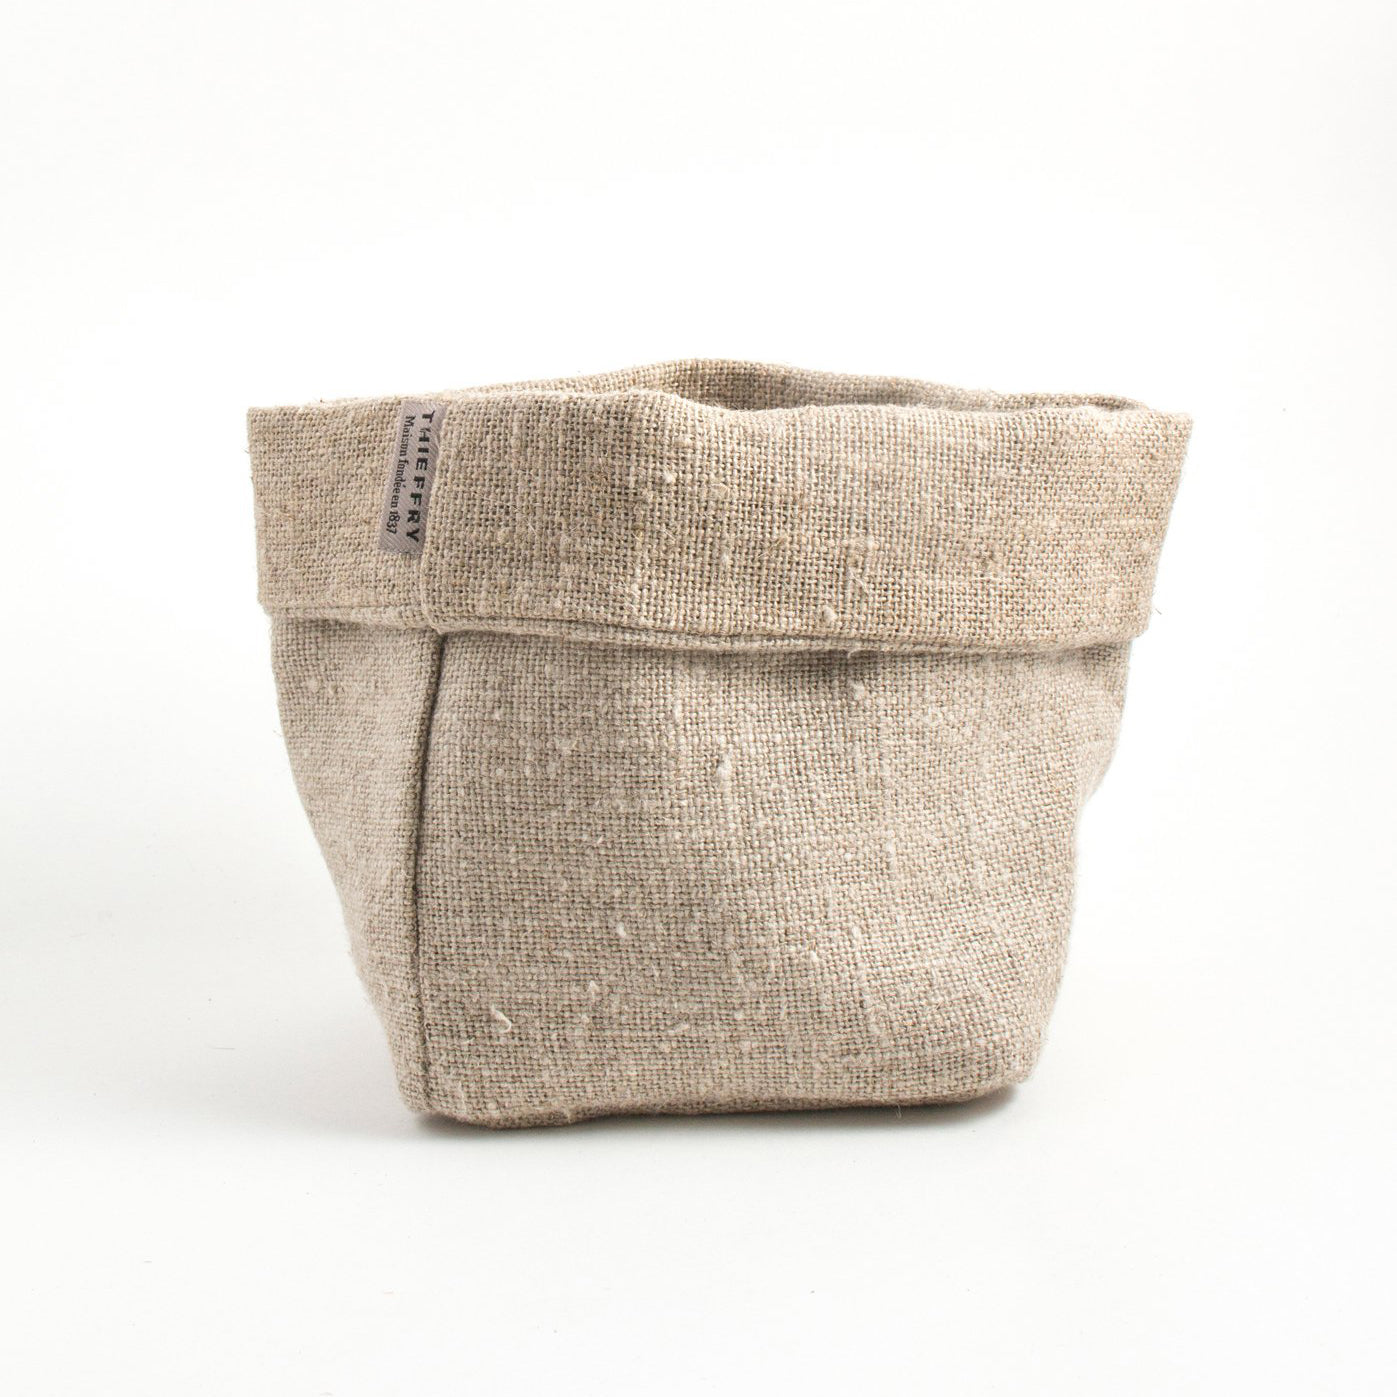 Thieffry Bagatelle Linen Bread Basket - French Dry Goods